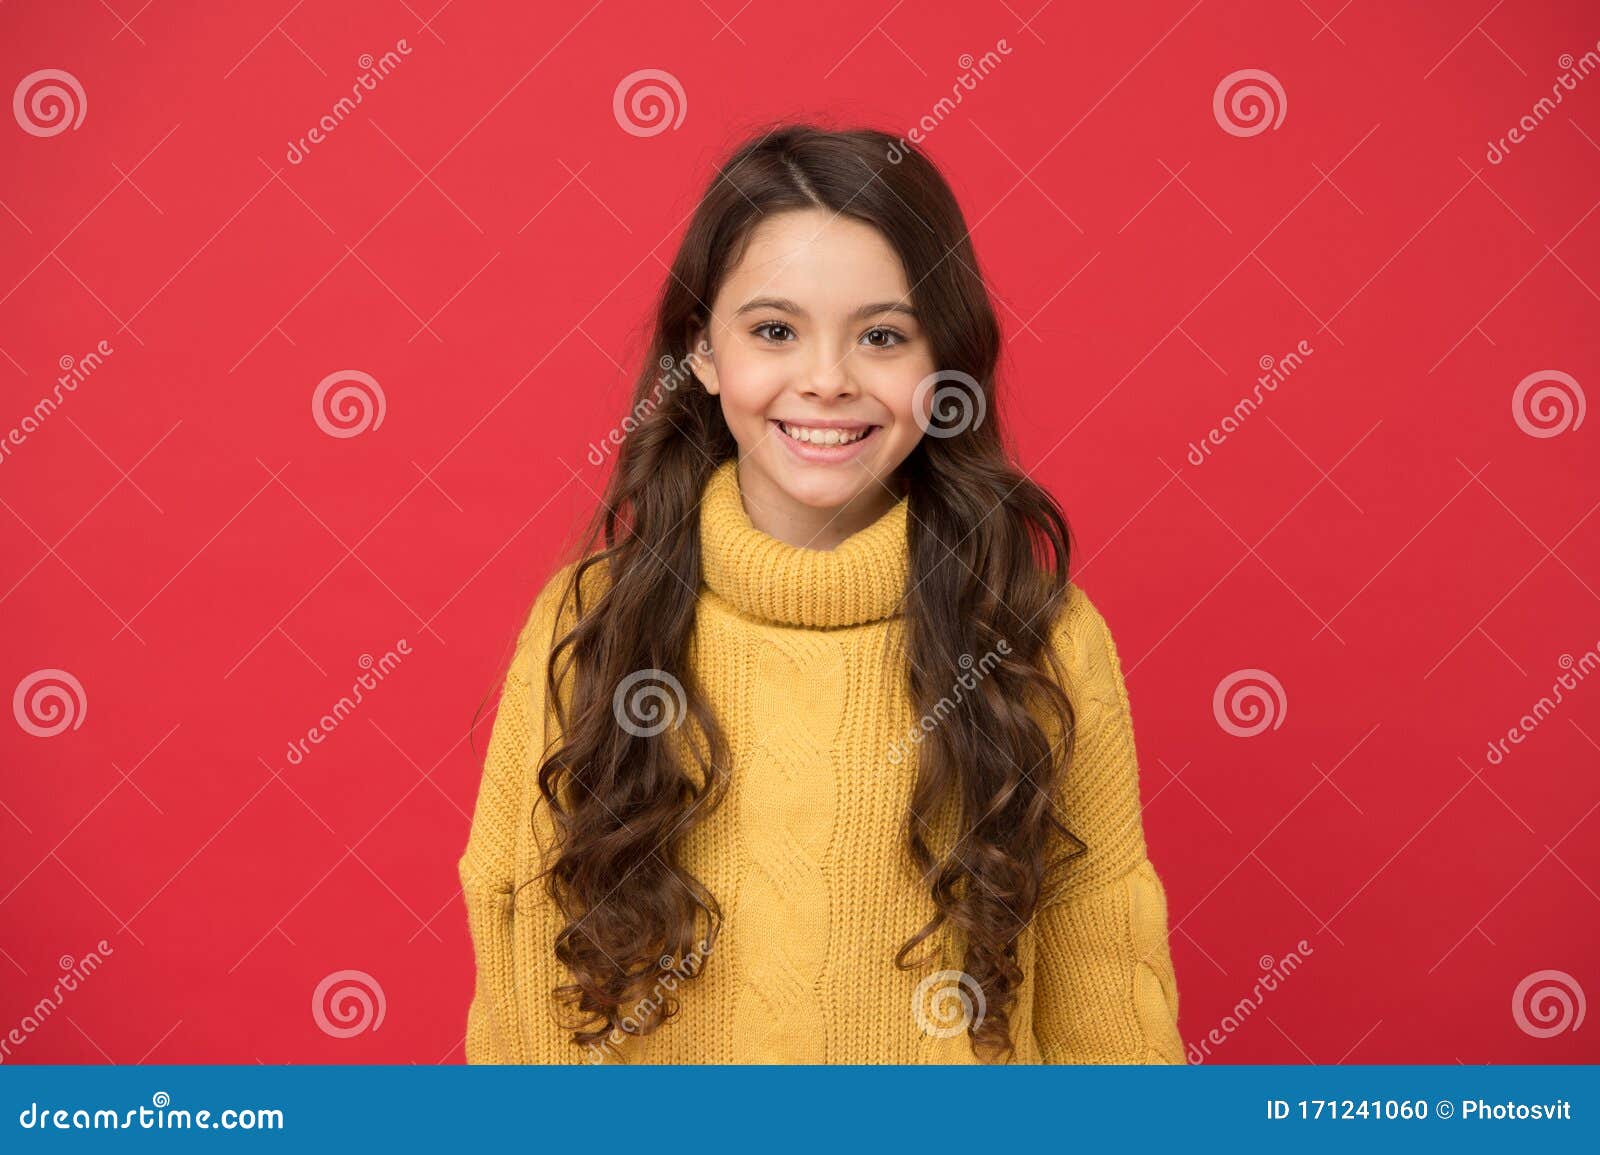 Natural Curls. Long Lasting Effect. Kid Cute Face Adorable Curly Hairstyle.  Little Girl Grow Long Hair Stock Photo - Image of hairstyle, long: 171241060